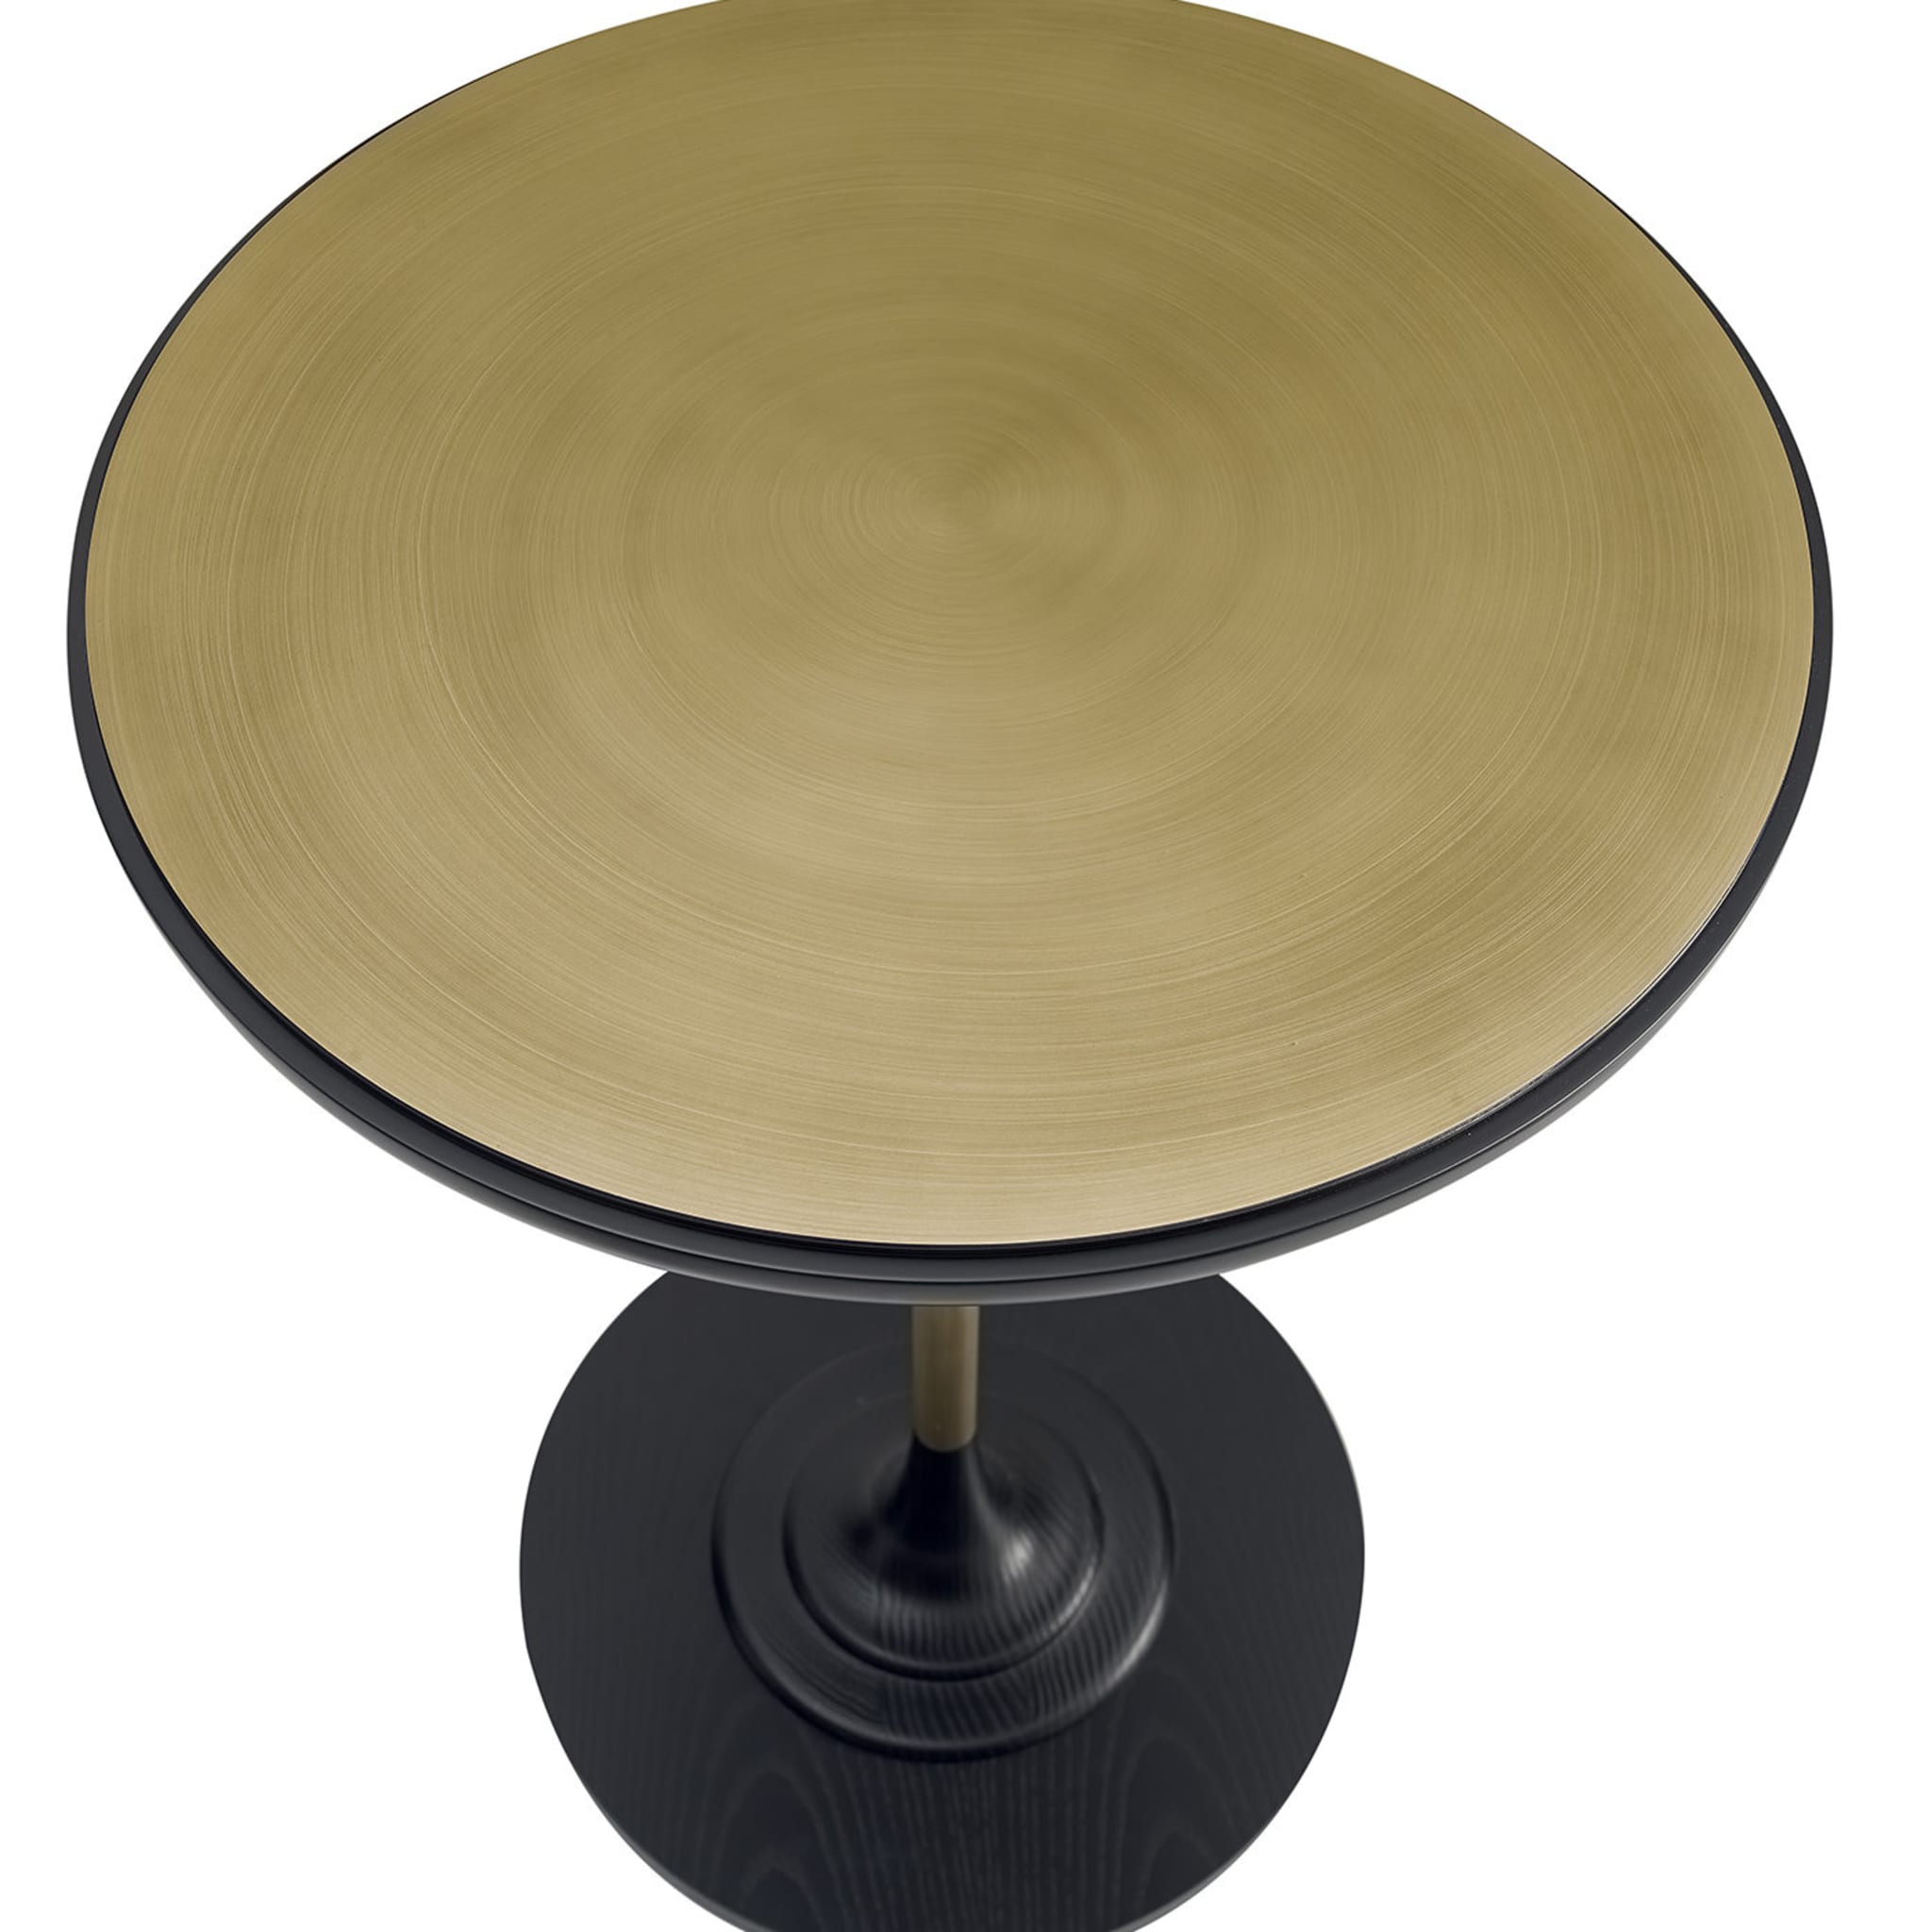 Bistro Table with Brass Top - Alternative view 1